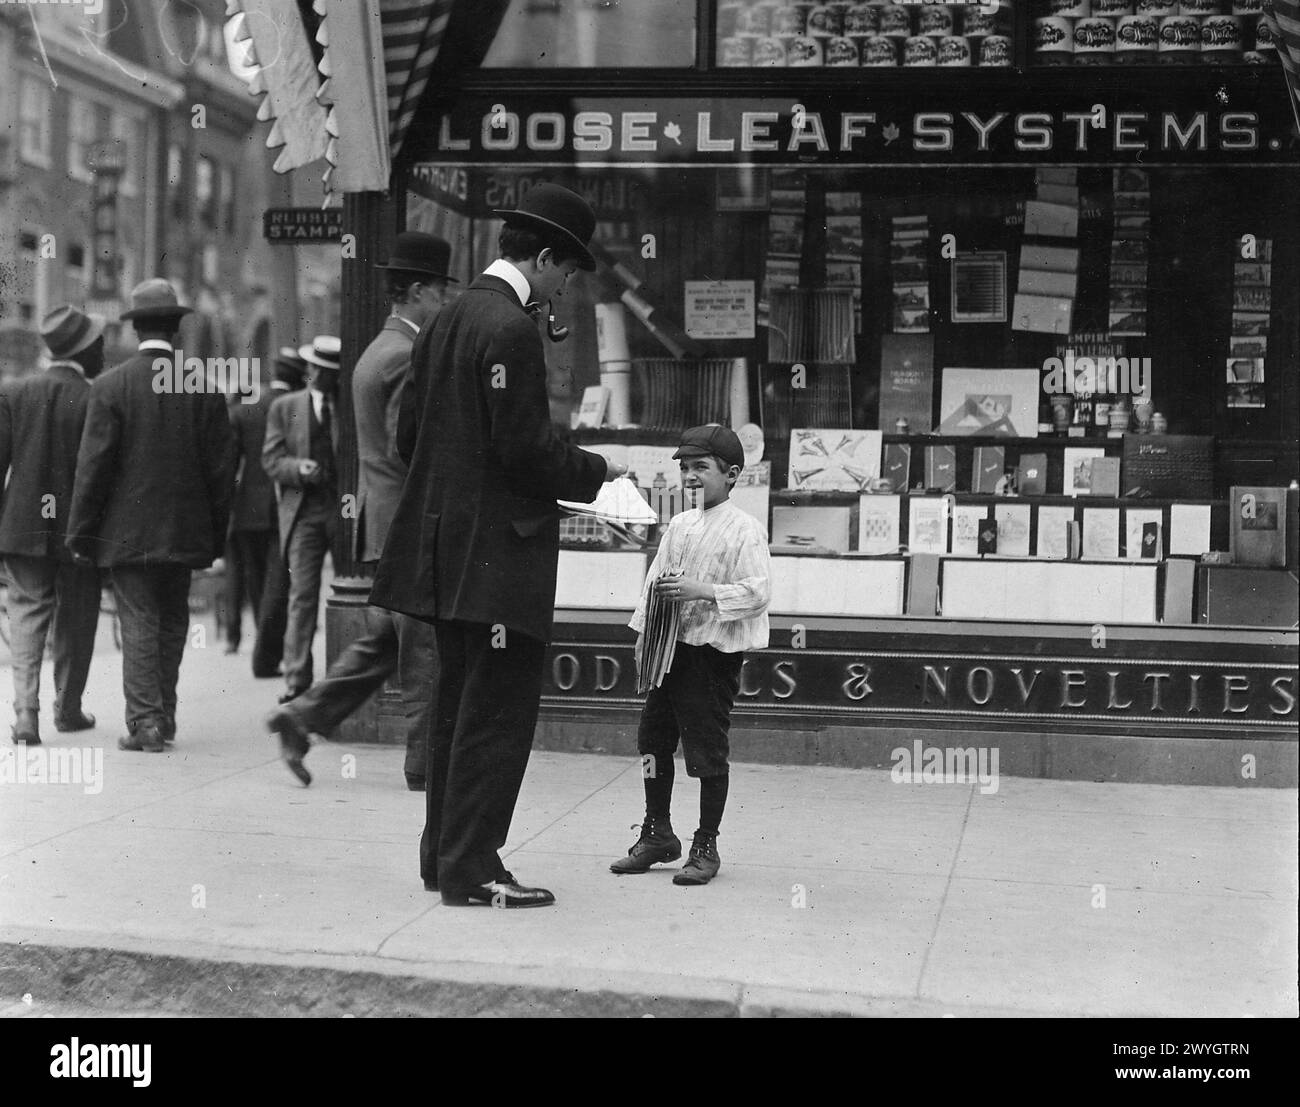 James Loqulla, a newsboy, 12 years old. Selling papers for 3 years. Average earnings 50 [cents] a week. works 7 hours a day. Wilmington, Delaware, May 1910.  Vintage American Photography 1910s. Child Labour Project.  Credit: Lewis Hines Stock Photo